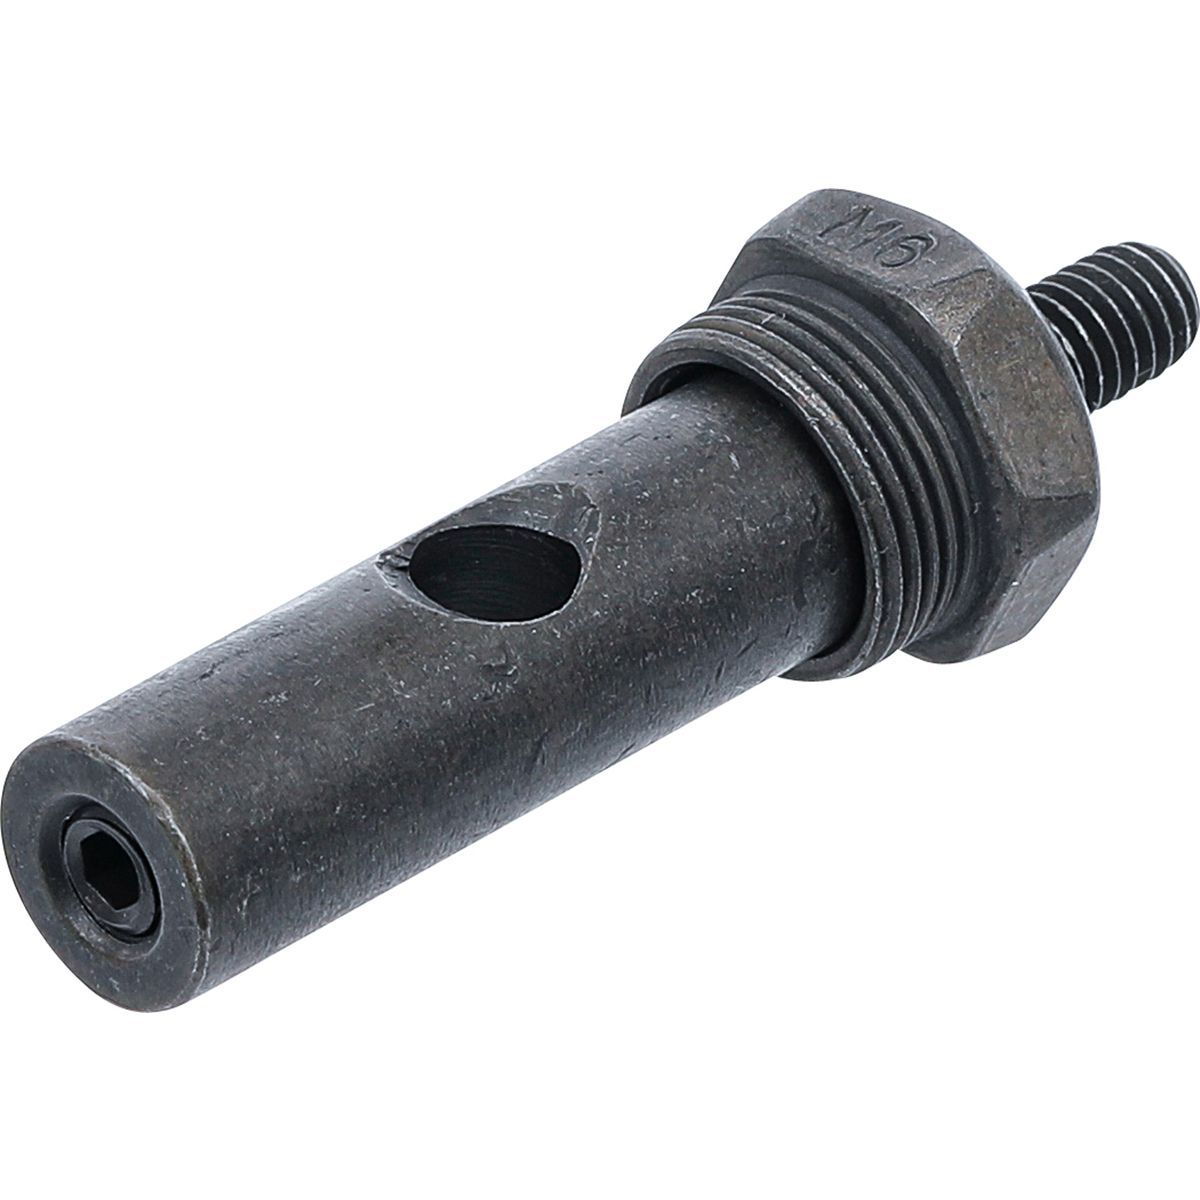 Rivet Nut Tension Extension for BGS 404 | M6